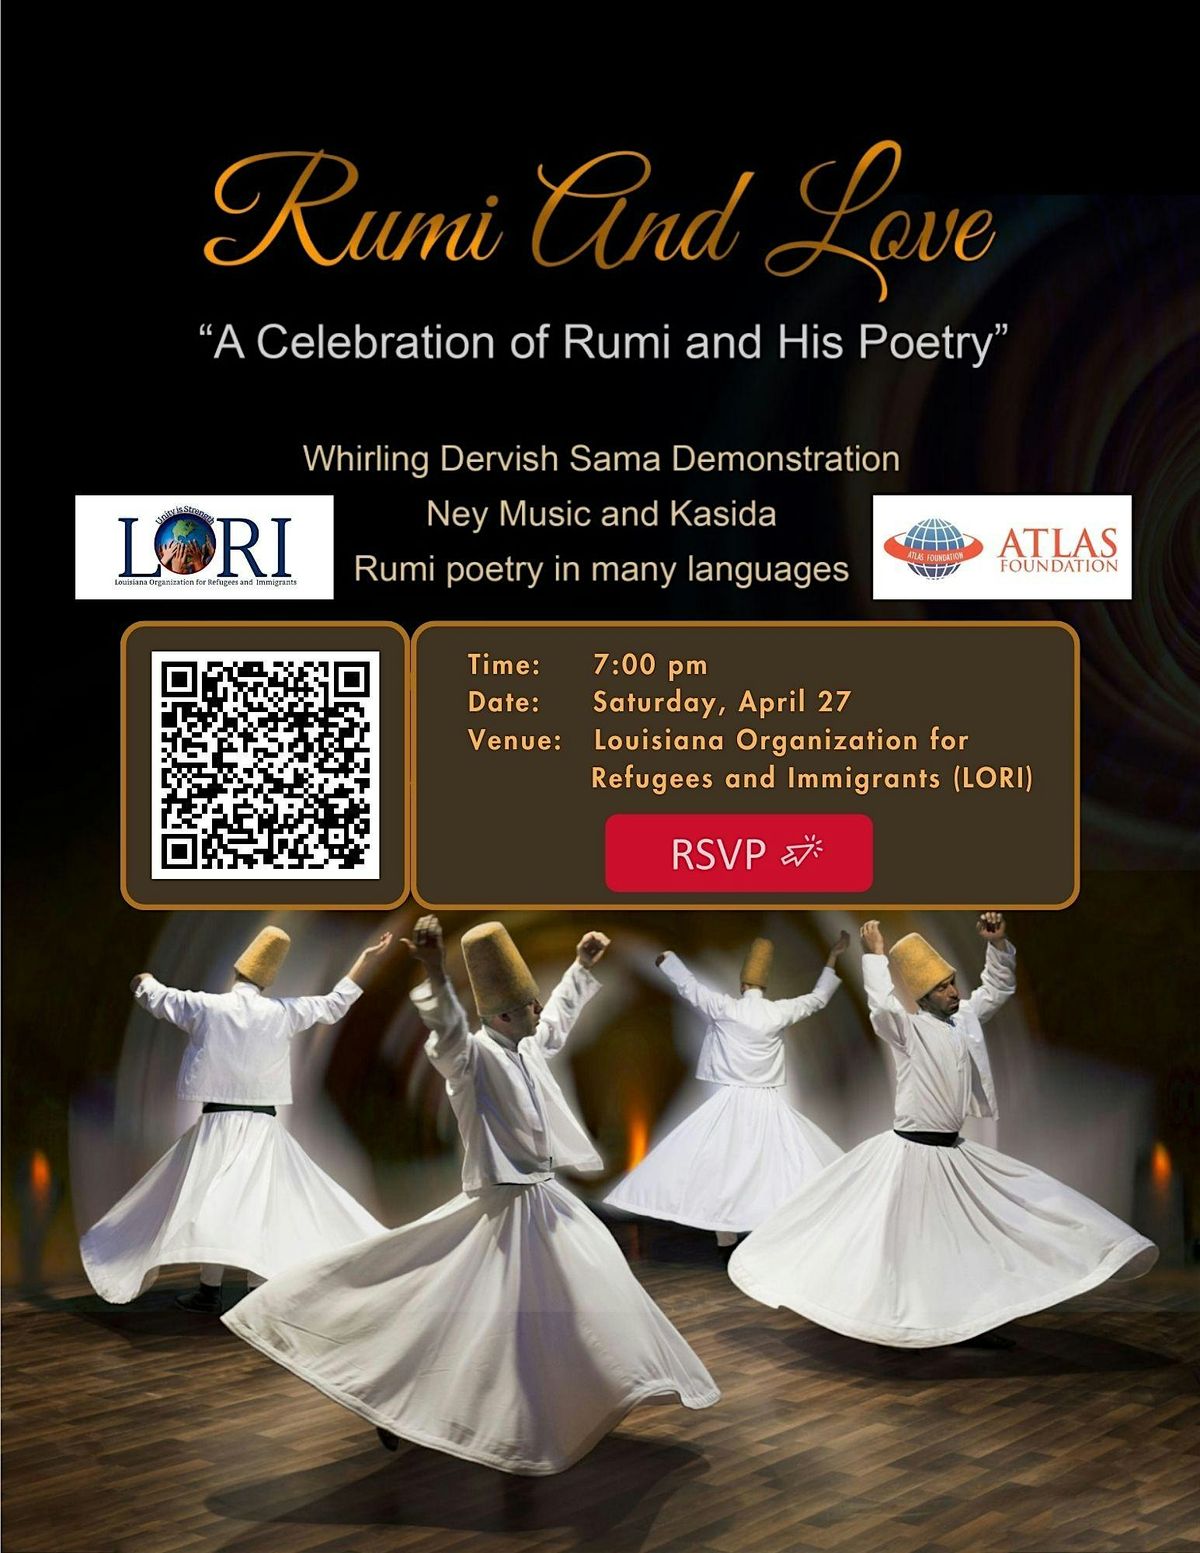 A Celebration of Rumi and His Poetry